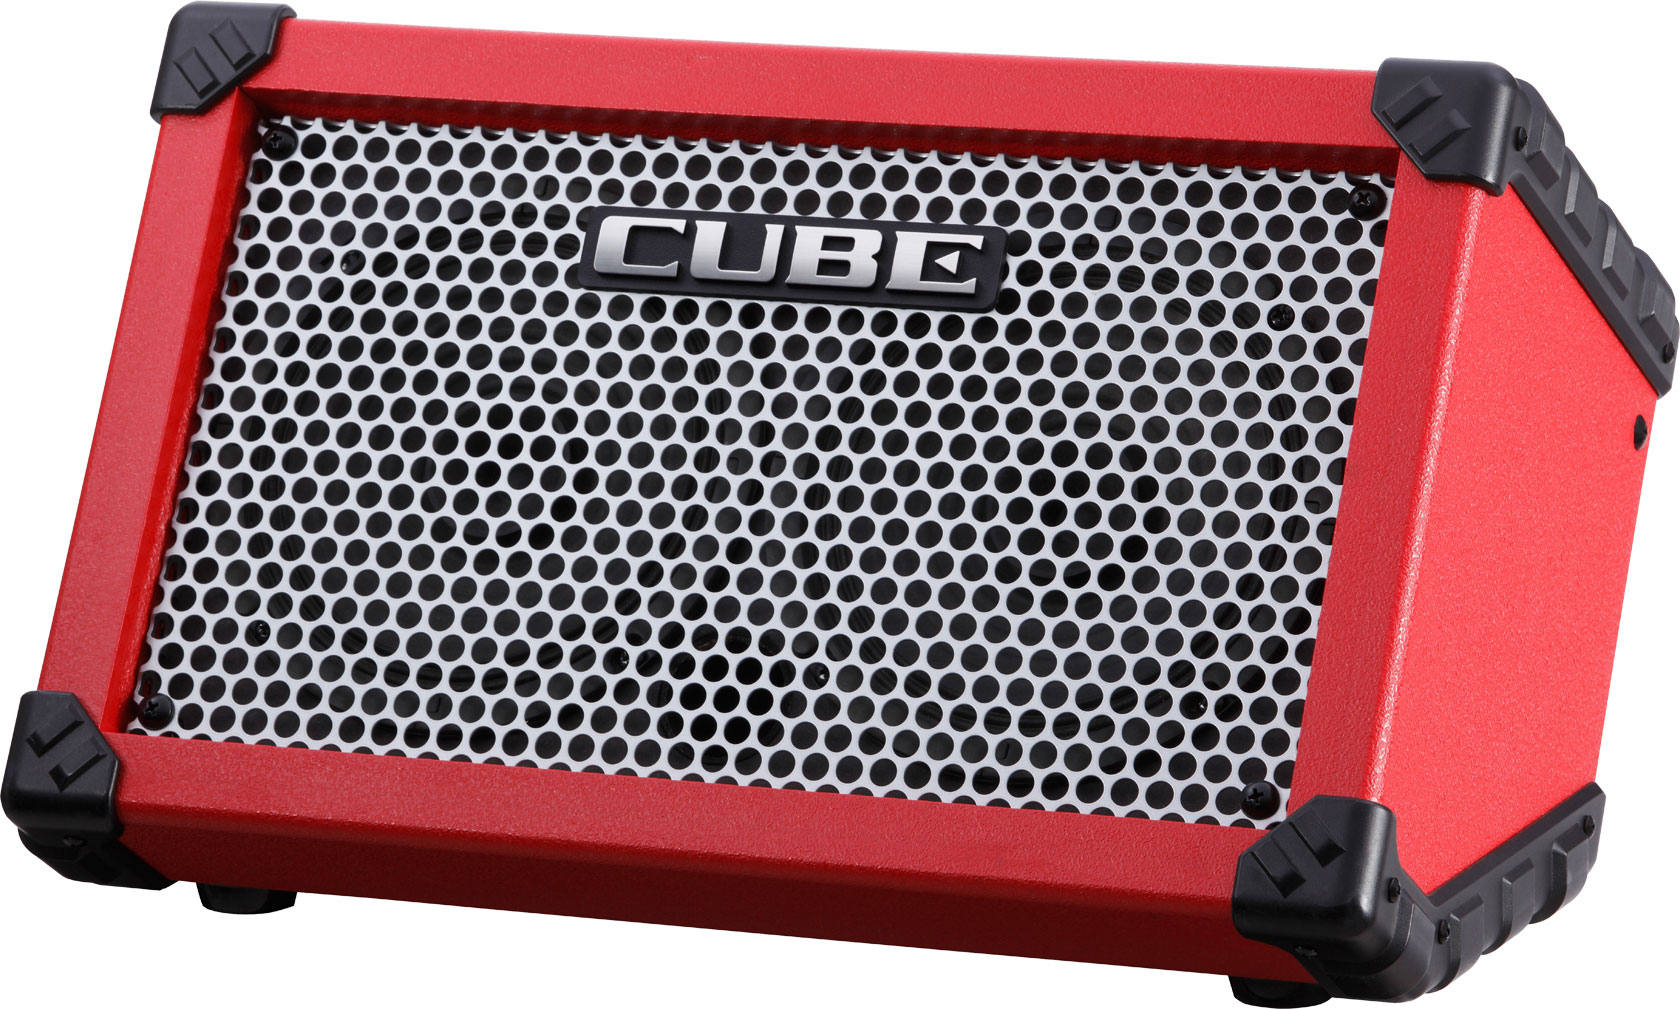 Roland Cube Street, Red